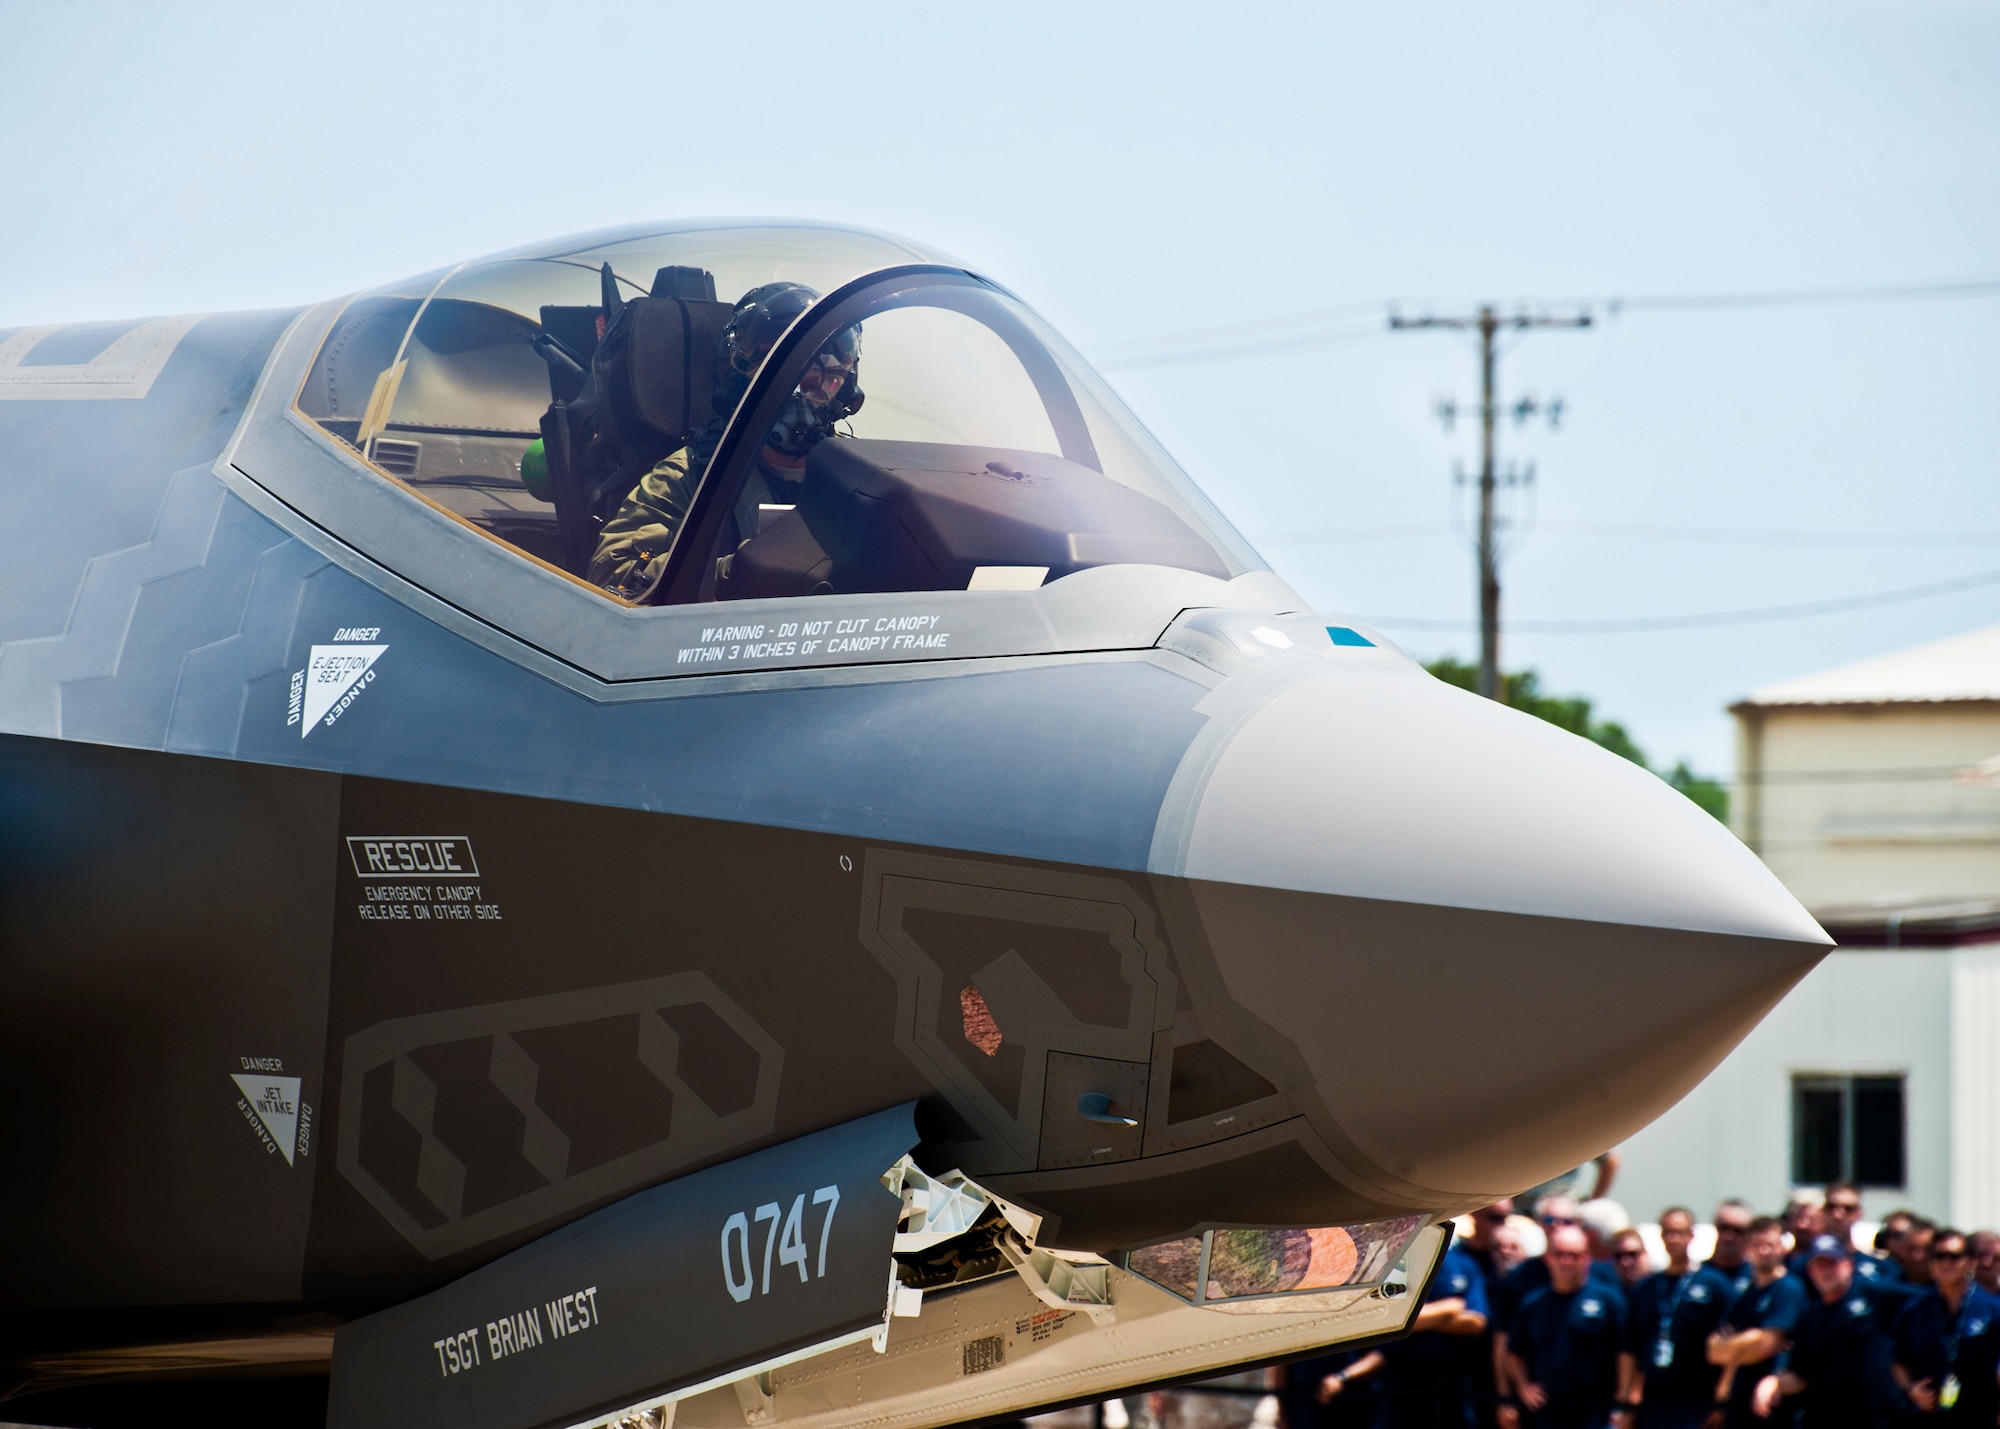 Members of the 33rd Fighter Wing came out to see DoD’s newest aircraft, the F-35 Lightning II joint strike fighter, when it arrived to its new home at Eglin Air Force Base, Fla., July 14. (U.S. Air Force photo/Samuel King Jr.)